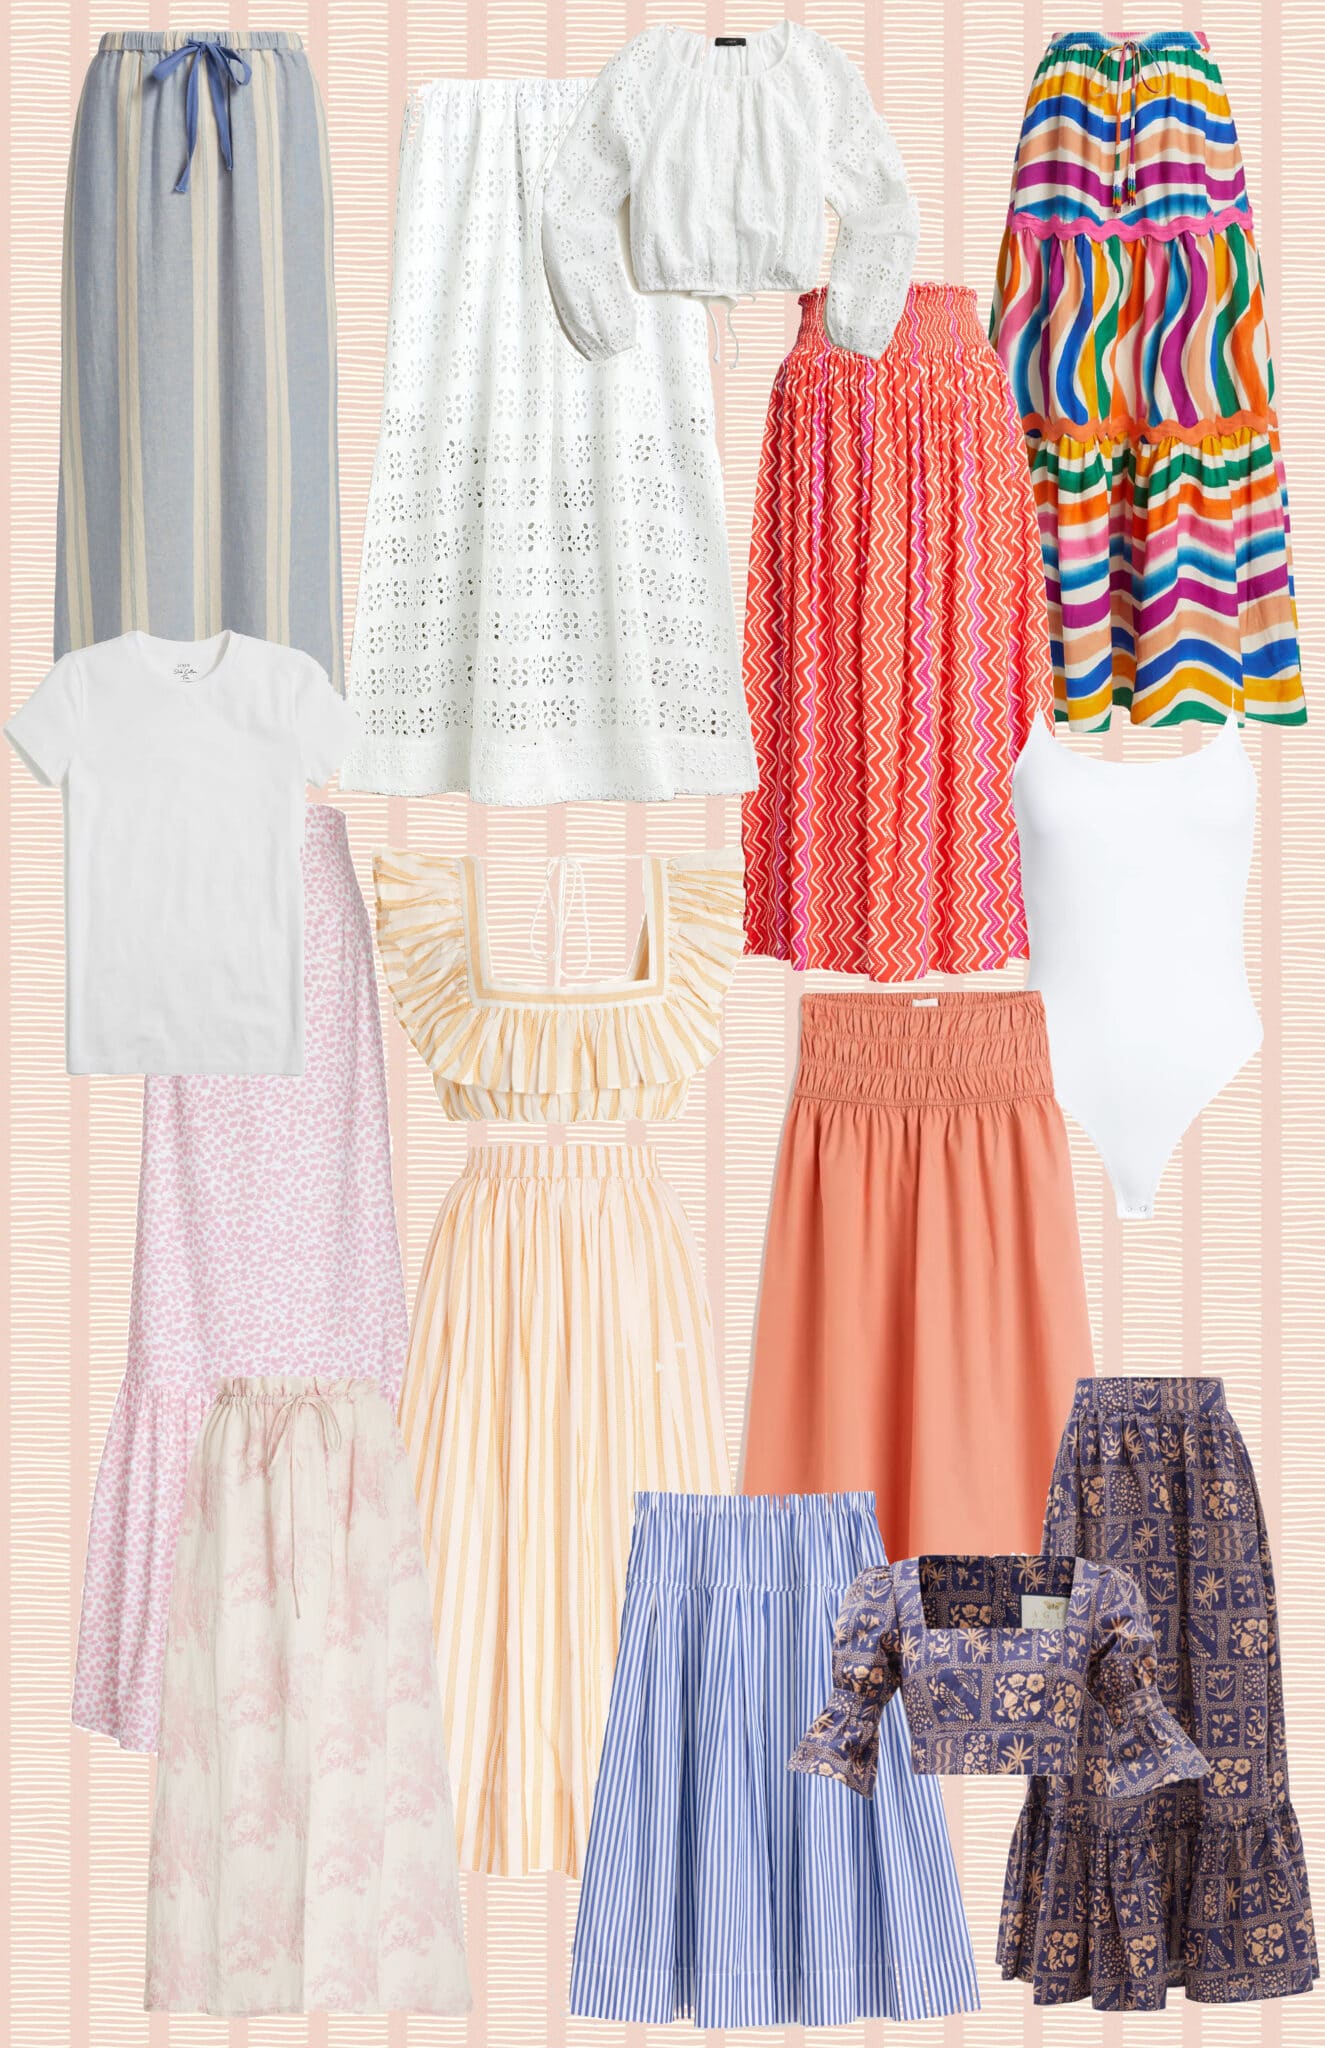 STATEMENT SKIRTS FOR SUMMER